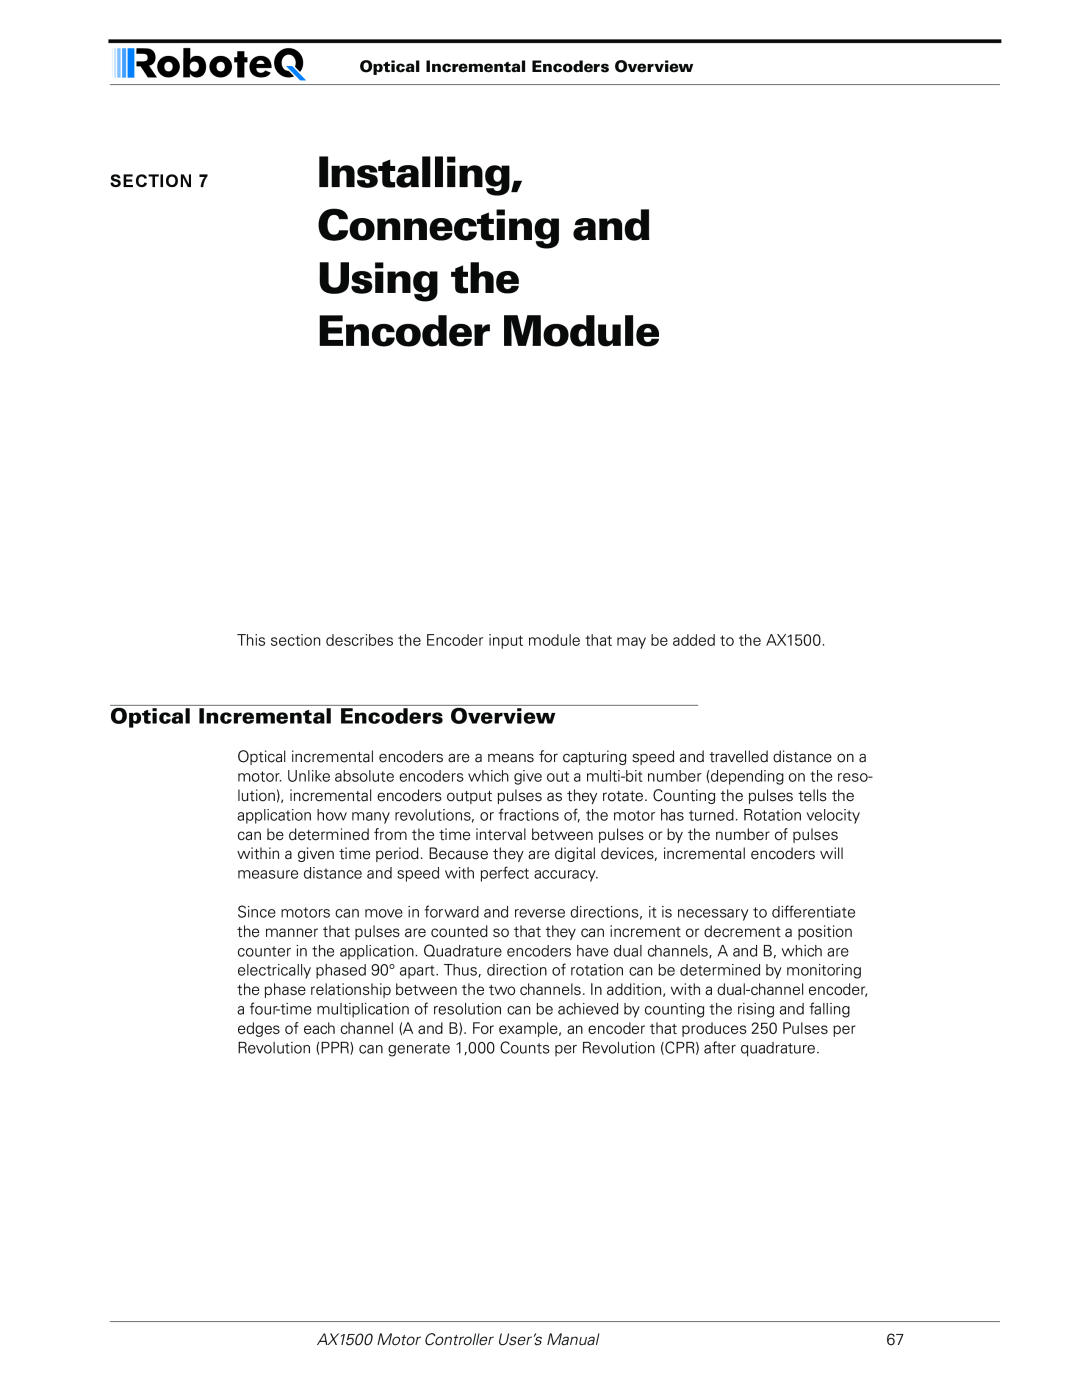 RoboteQ AX1500, AX2550 user manual Installing Connecting and Using the Encoder Module, Optical Incremental Encoders Overview 